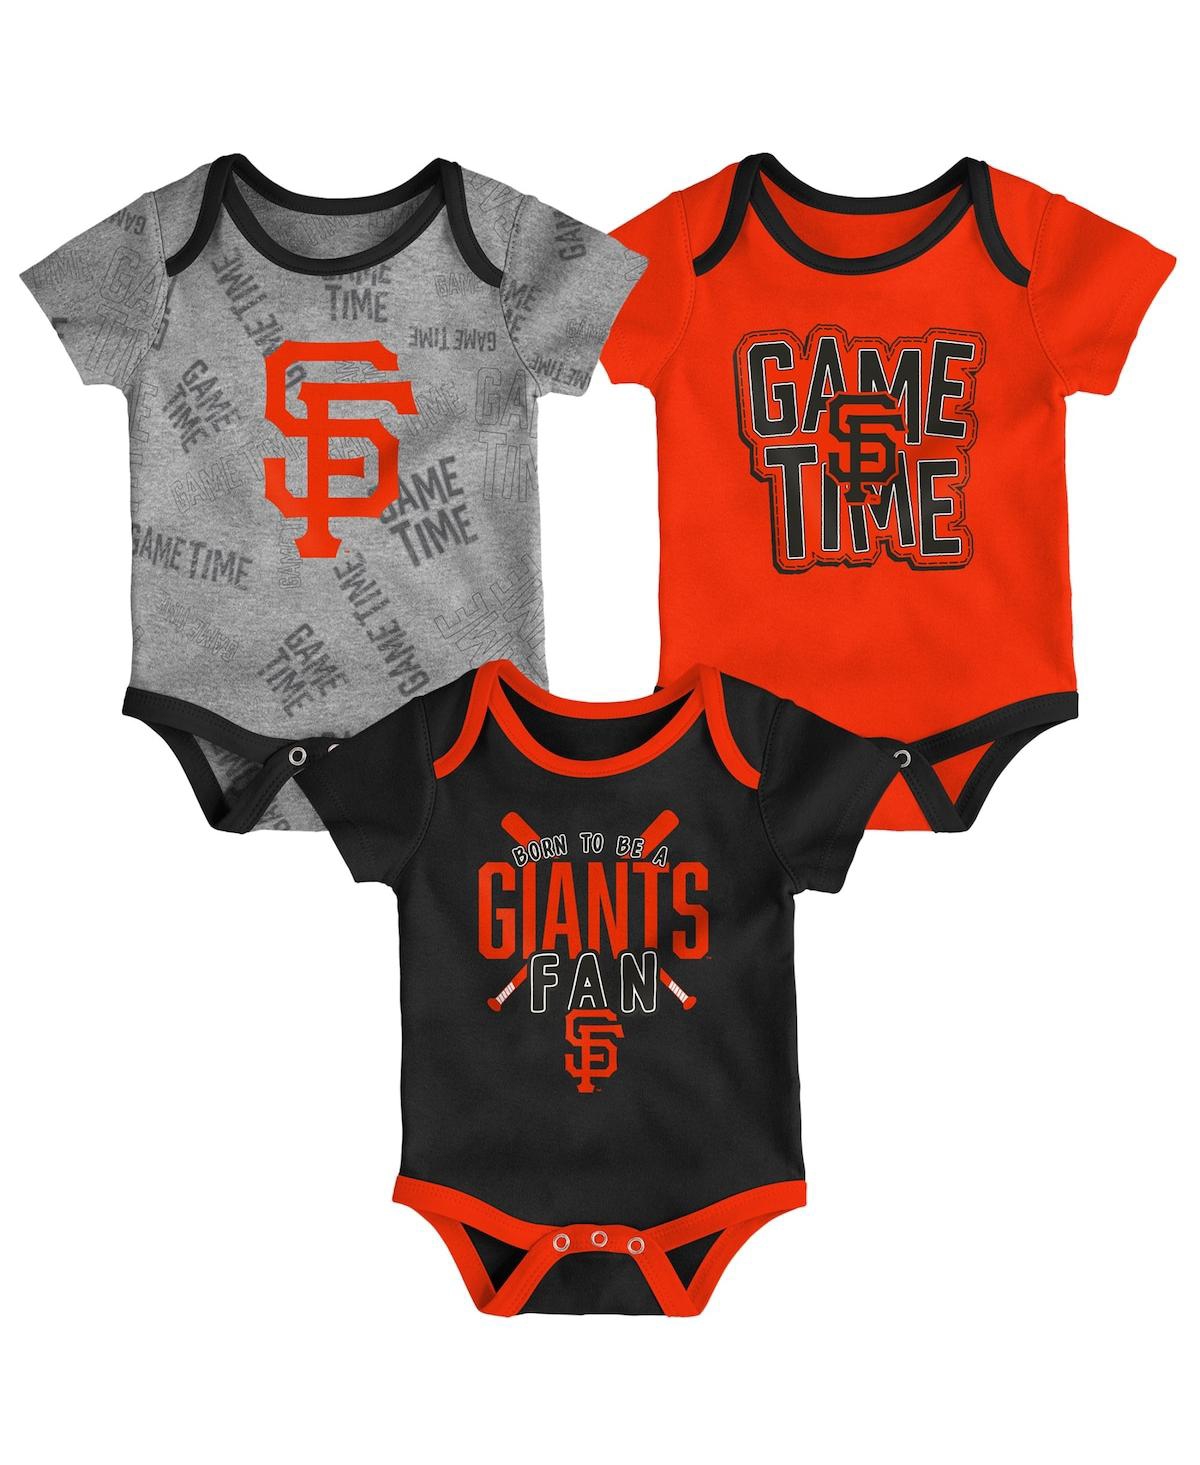 Outerstuff Babies' Newborn And Infant Boys And Girls San Francisco Giants Black, Orange, Heathered Gray Game Time Three In Black,orange,heathered Gray